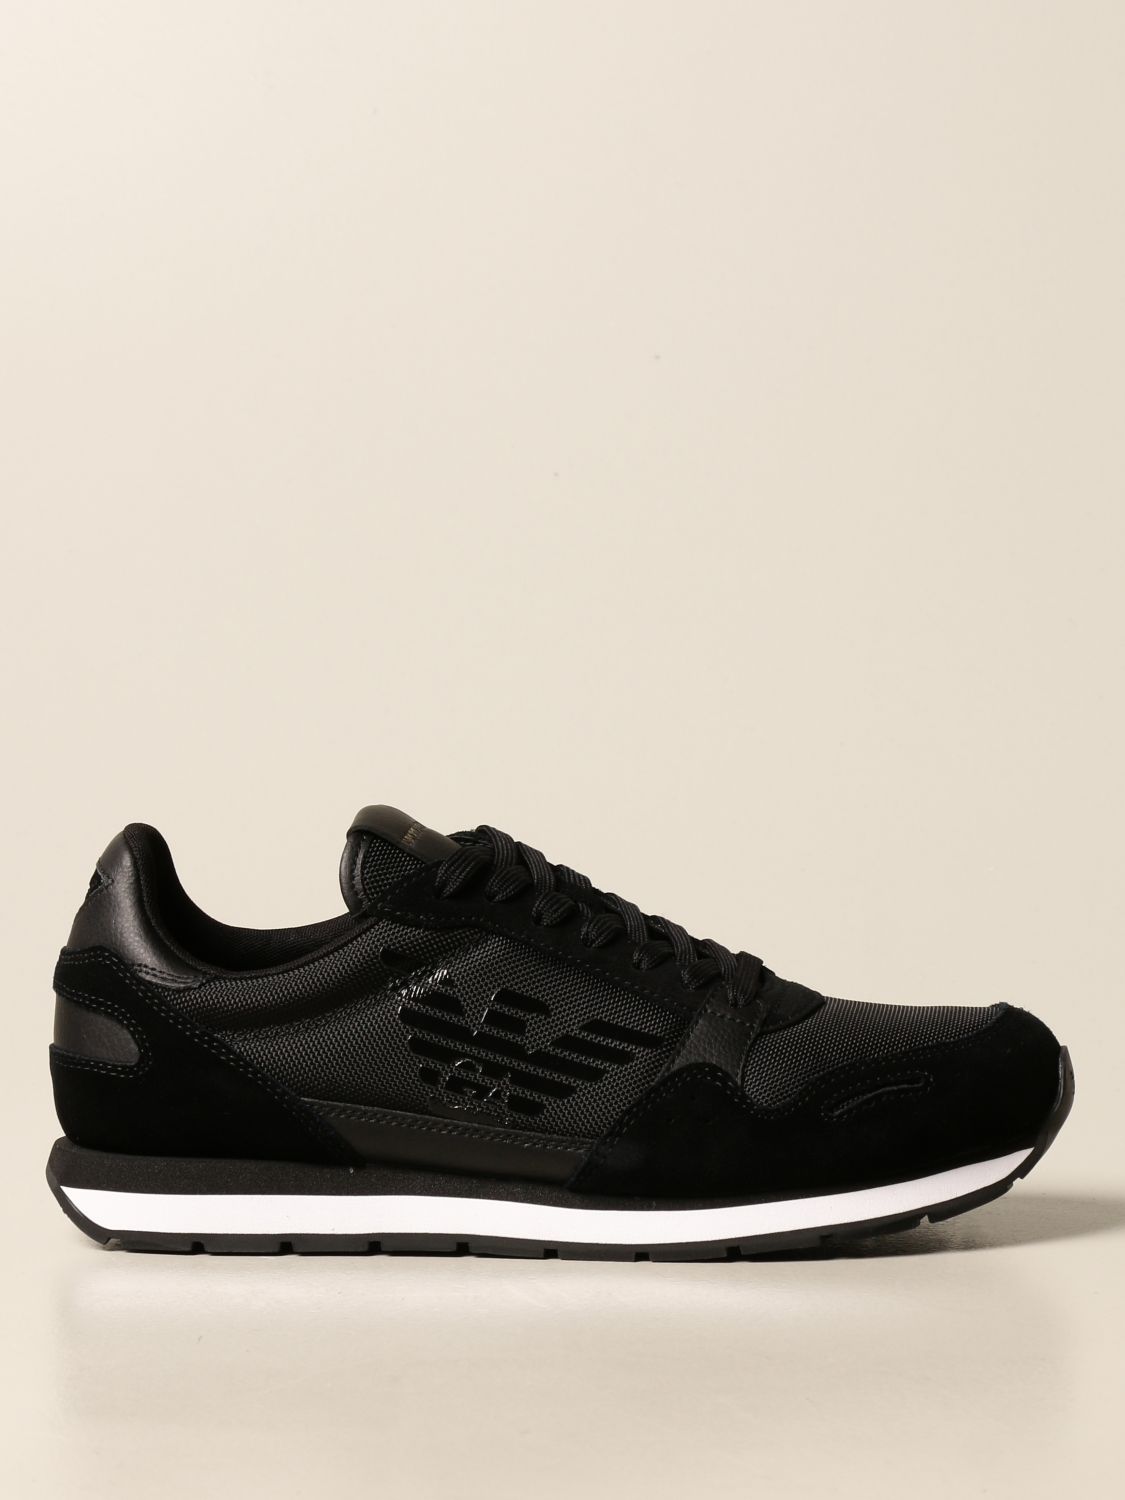 Emporio Armani Outlet: sneakers in suede and technical fabric - Black ...